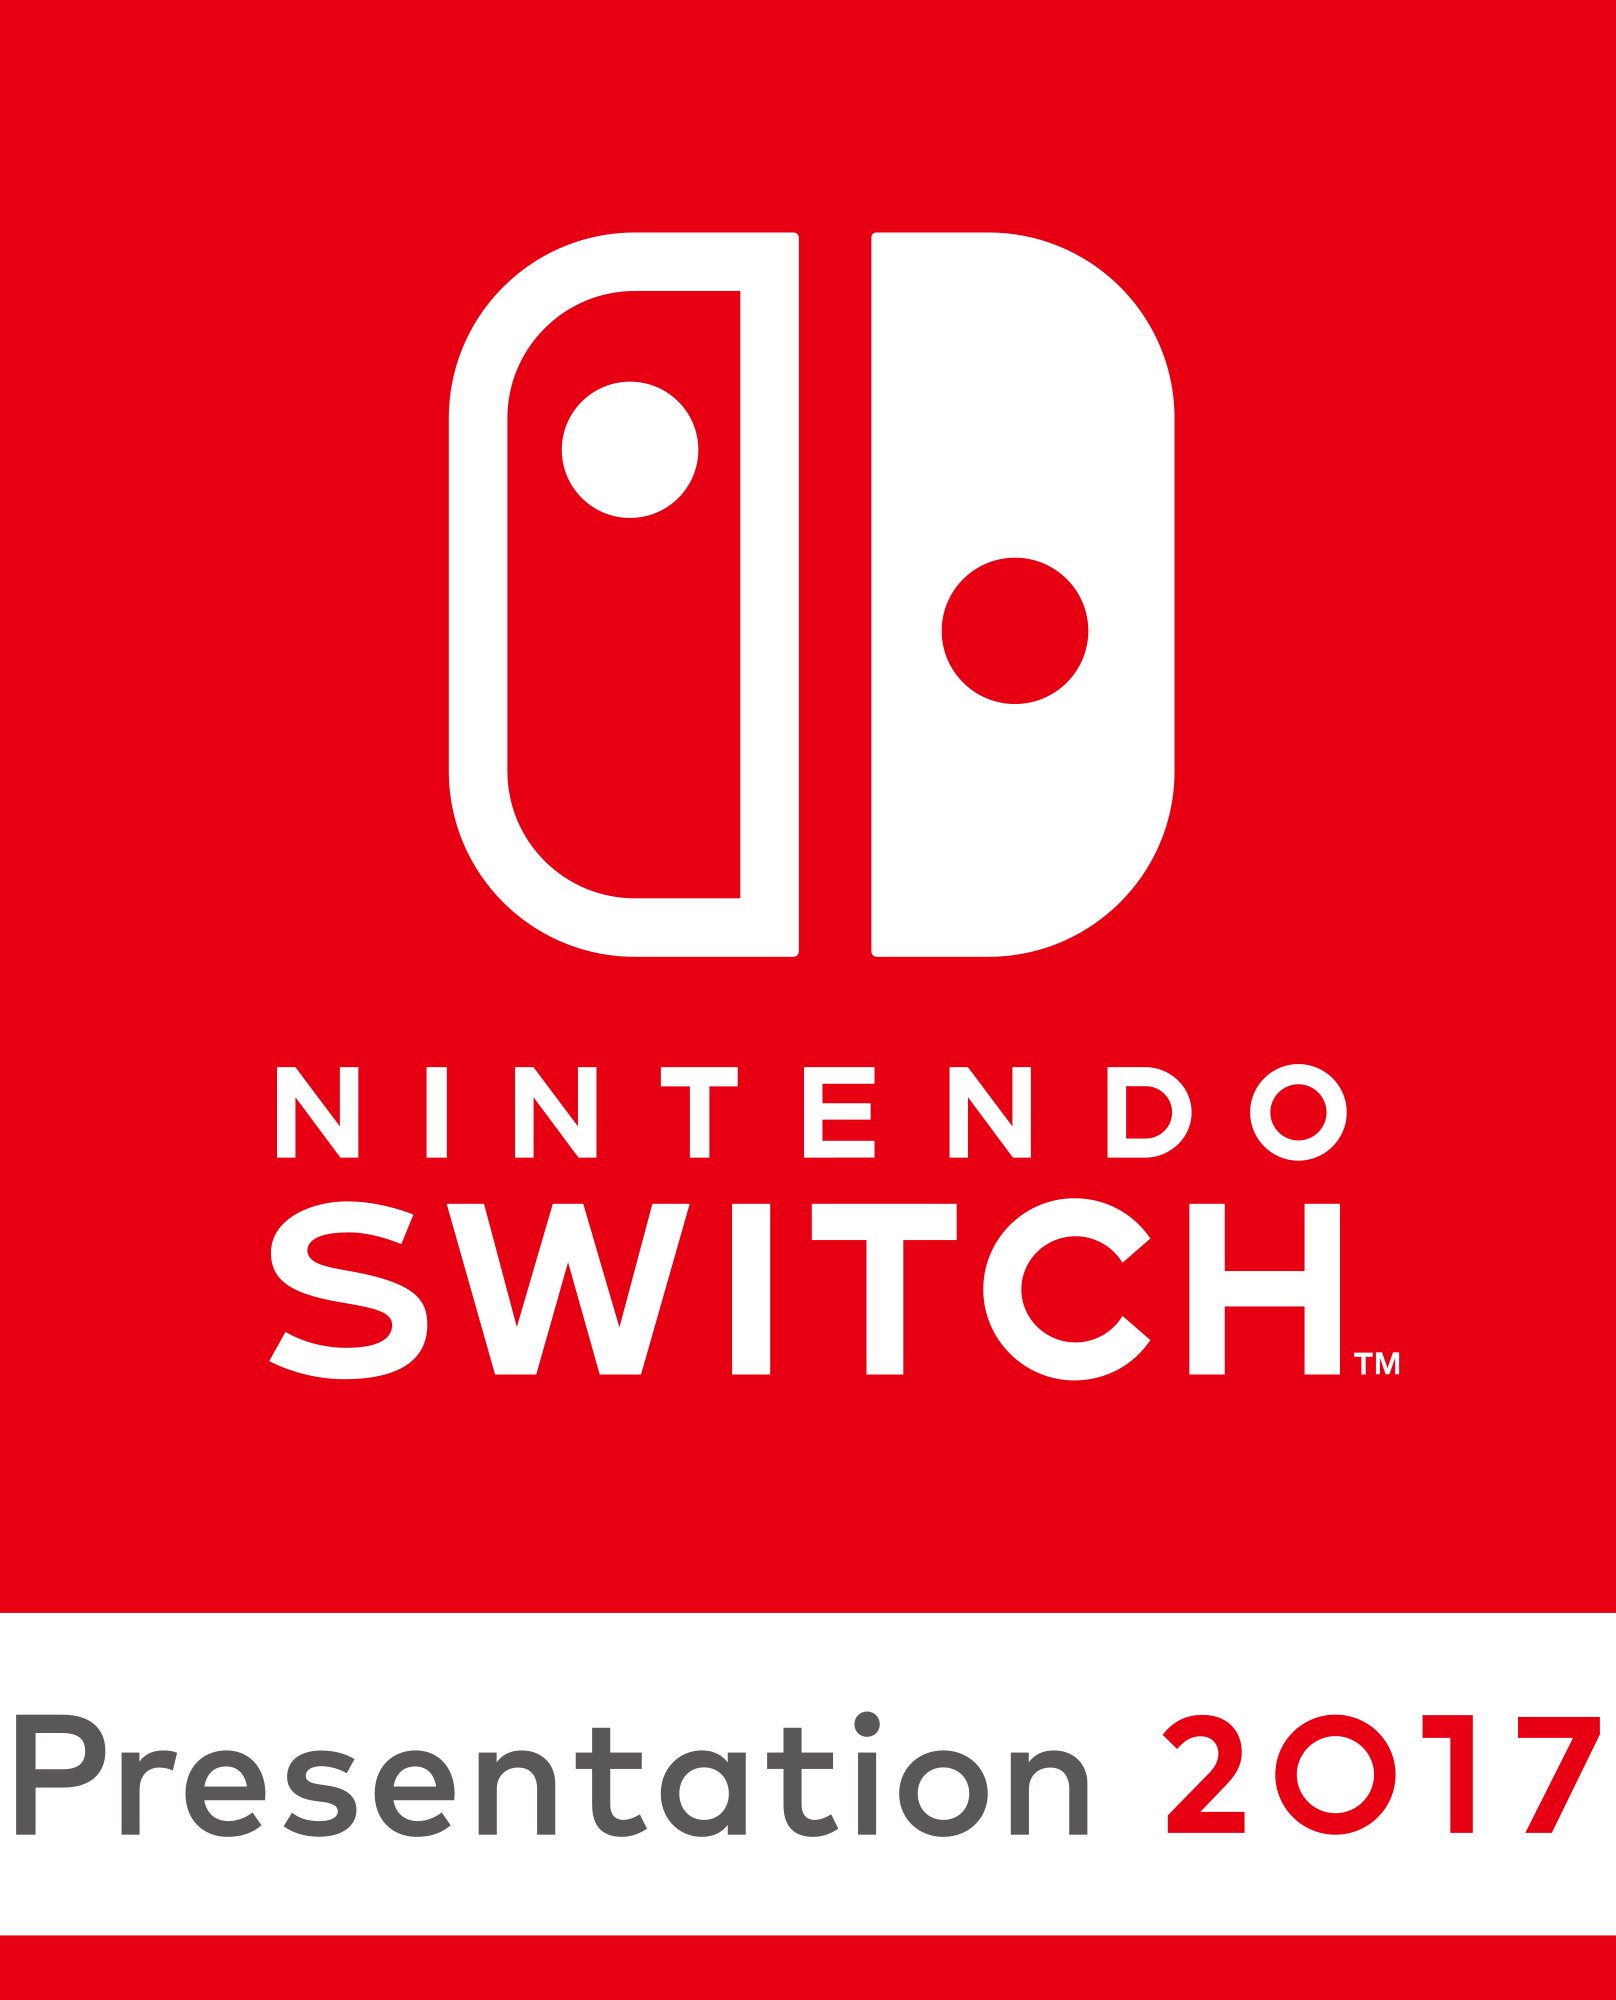 Nintendo Switch Presentation Announced for January 2017